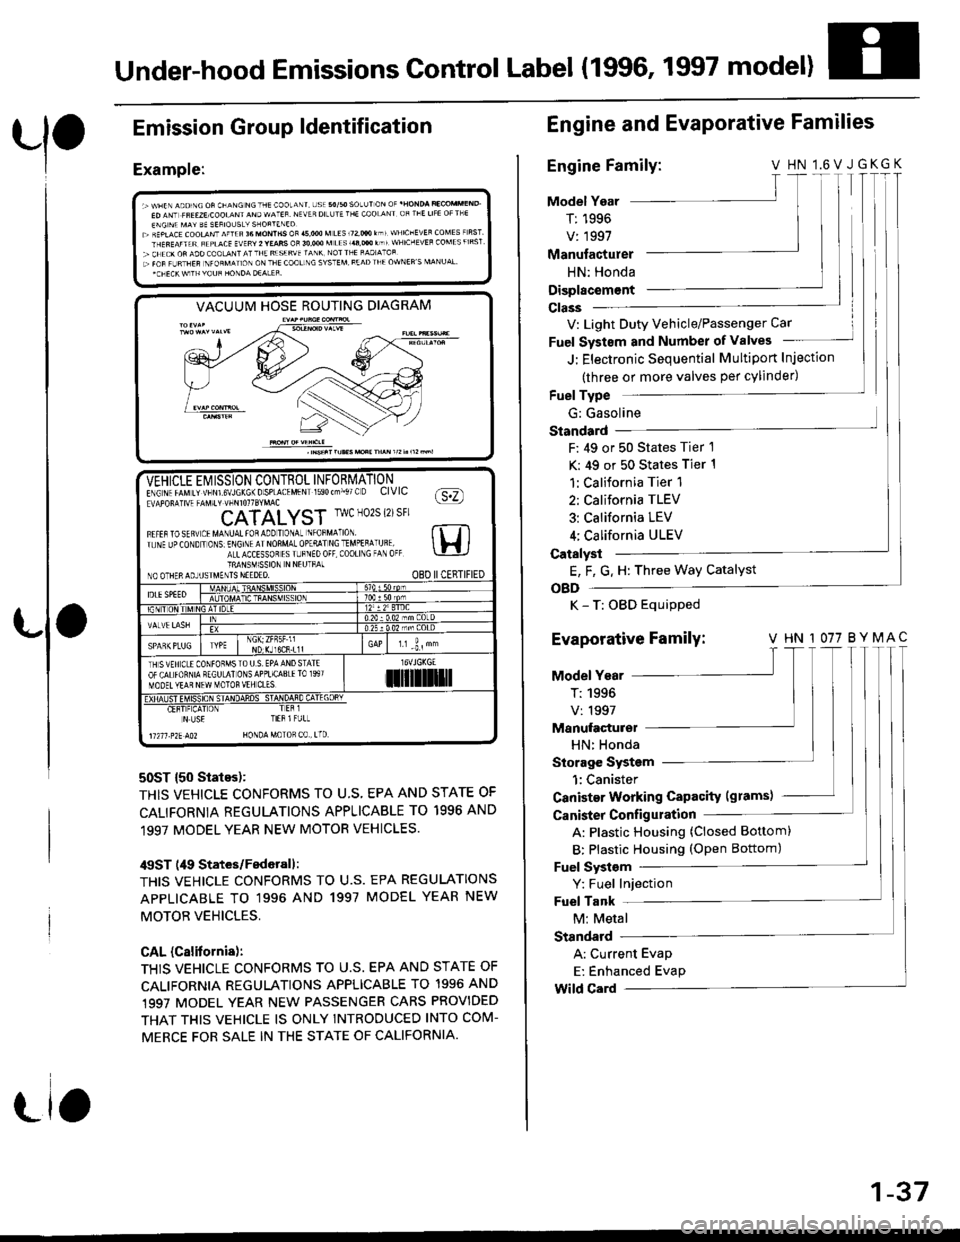 HONDA CIVIC 1998 6.G Workshop Manual Under-hood Emissions Control Label (1996, 1997 model)
Emission
Example:
Group ldentification
VACUUM HOSE ROUTING DIAGRAM
50ST {50 States):
THIS VEHICLE CONFORMS TO U.S, EPA AND STATE OF
CALIFORNIA REG